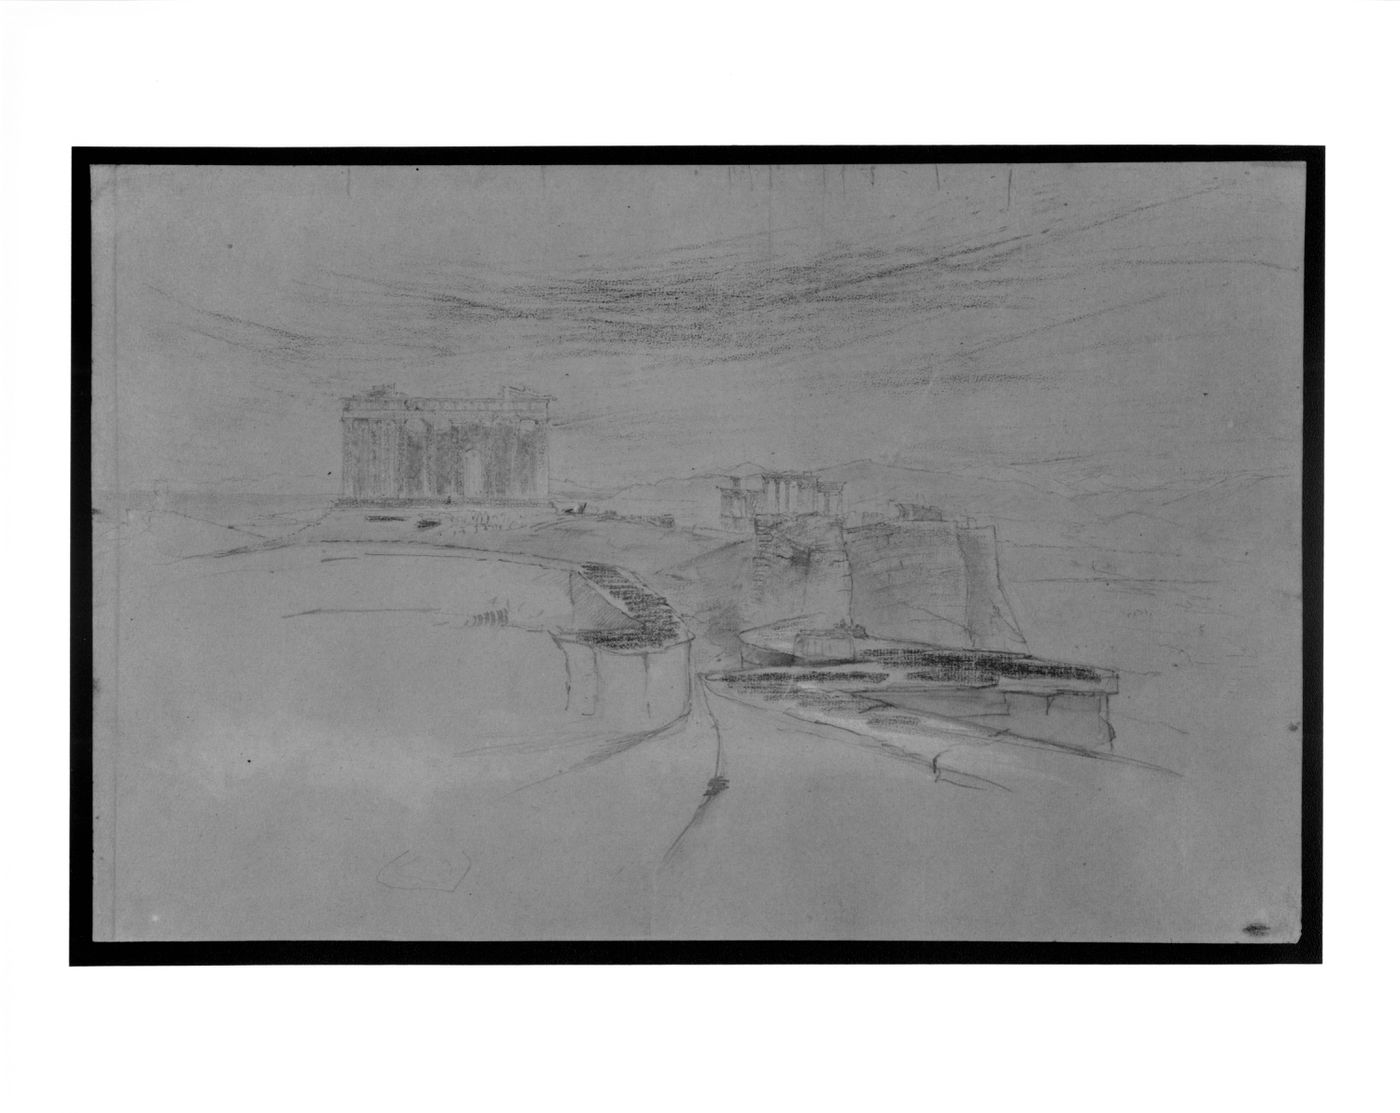 Perspective sketch of the Acropolis, Athens